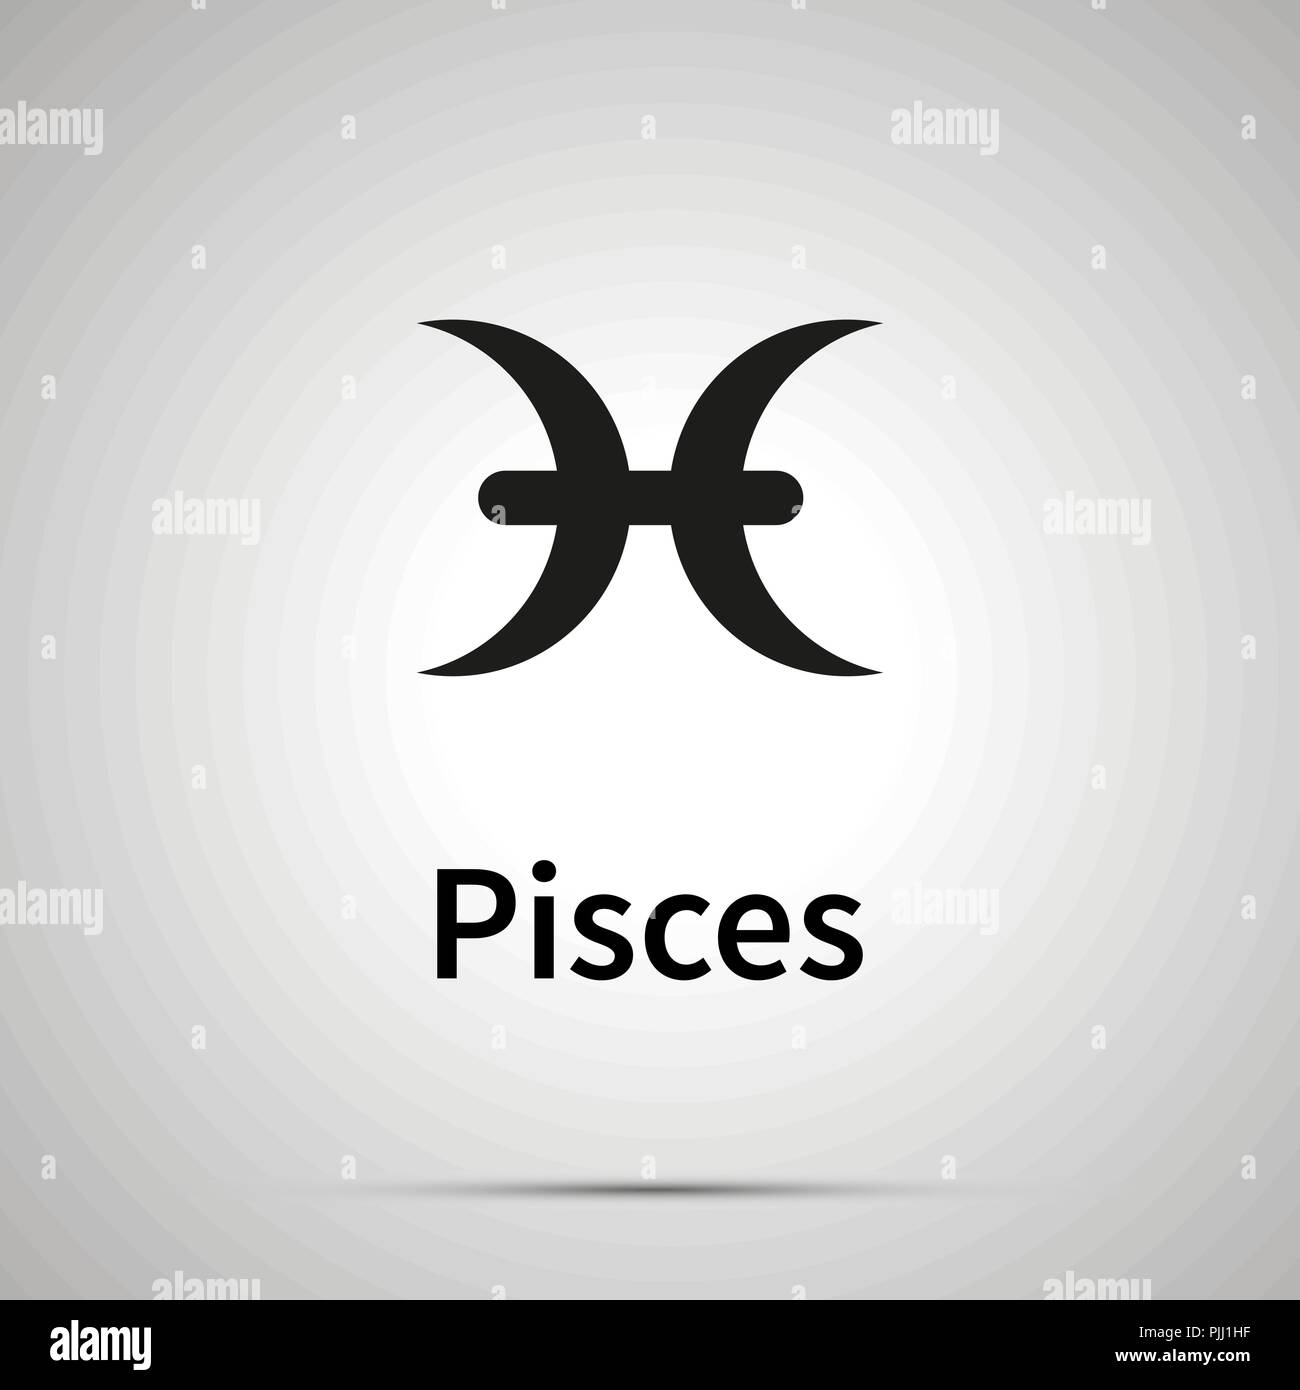 Pisces astronomical sign, simple black icon with shadow Stock Vector